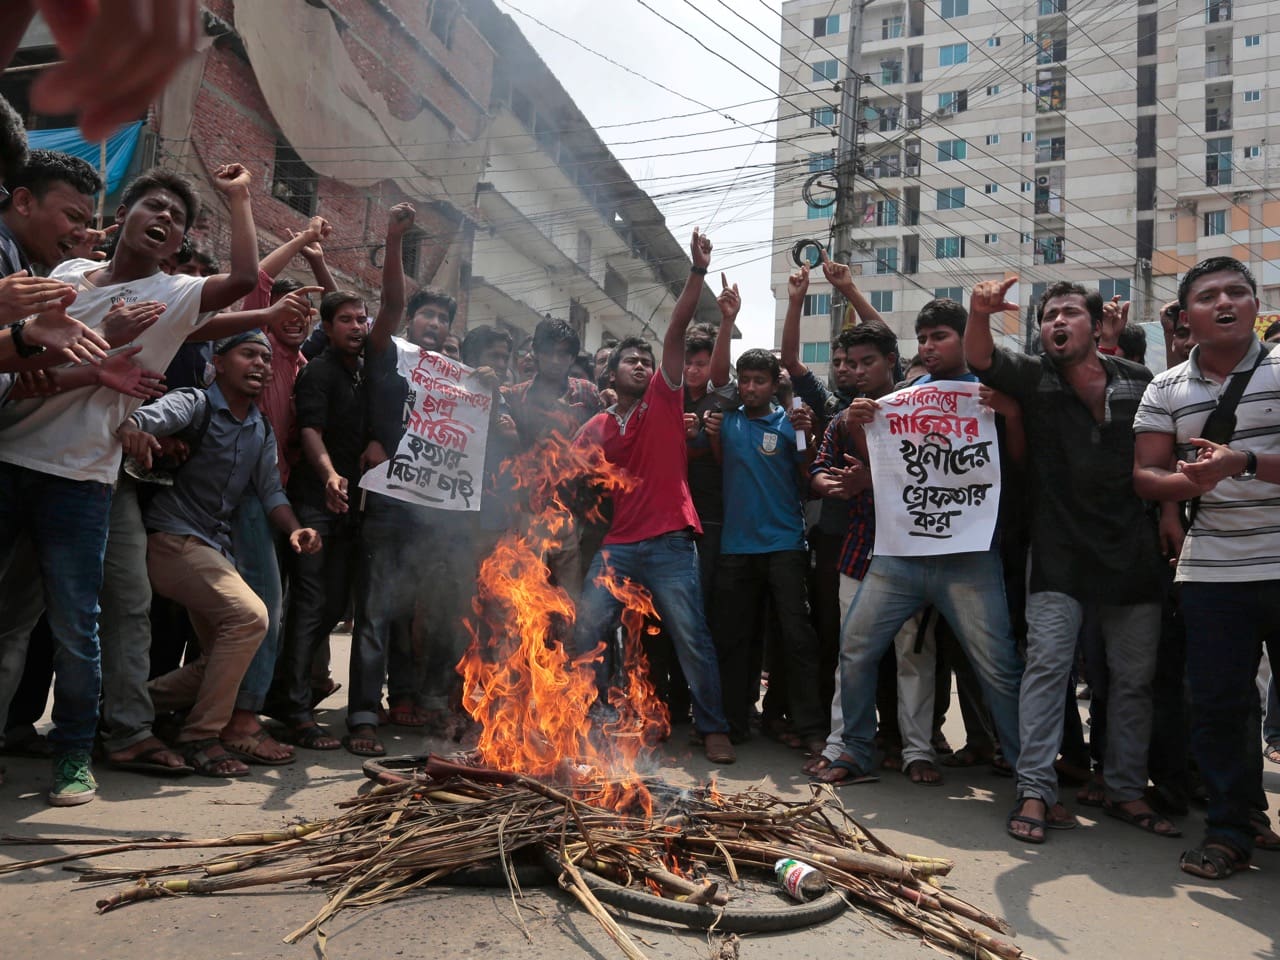 On 7 April 2016, students protest in Dhaka seeking the arrest of three motorcycle-riding assailants who killed student activist Nazimuddin Samad, AP Photo